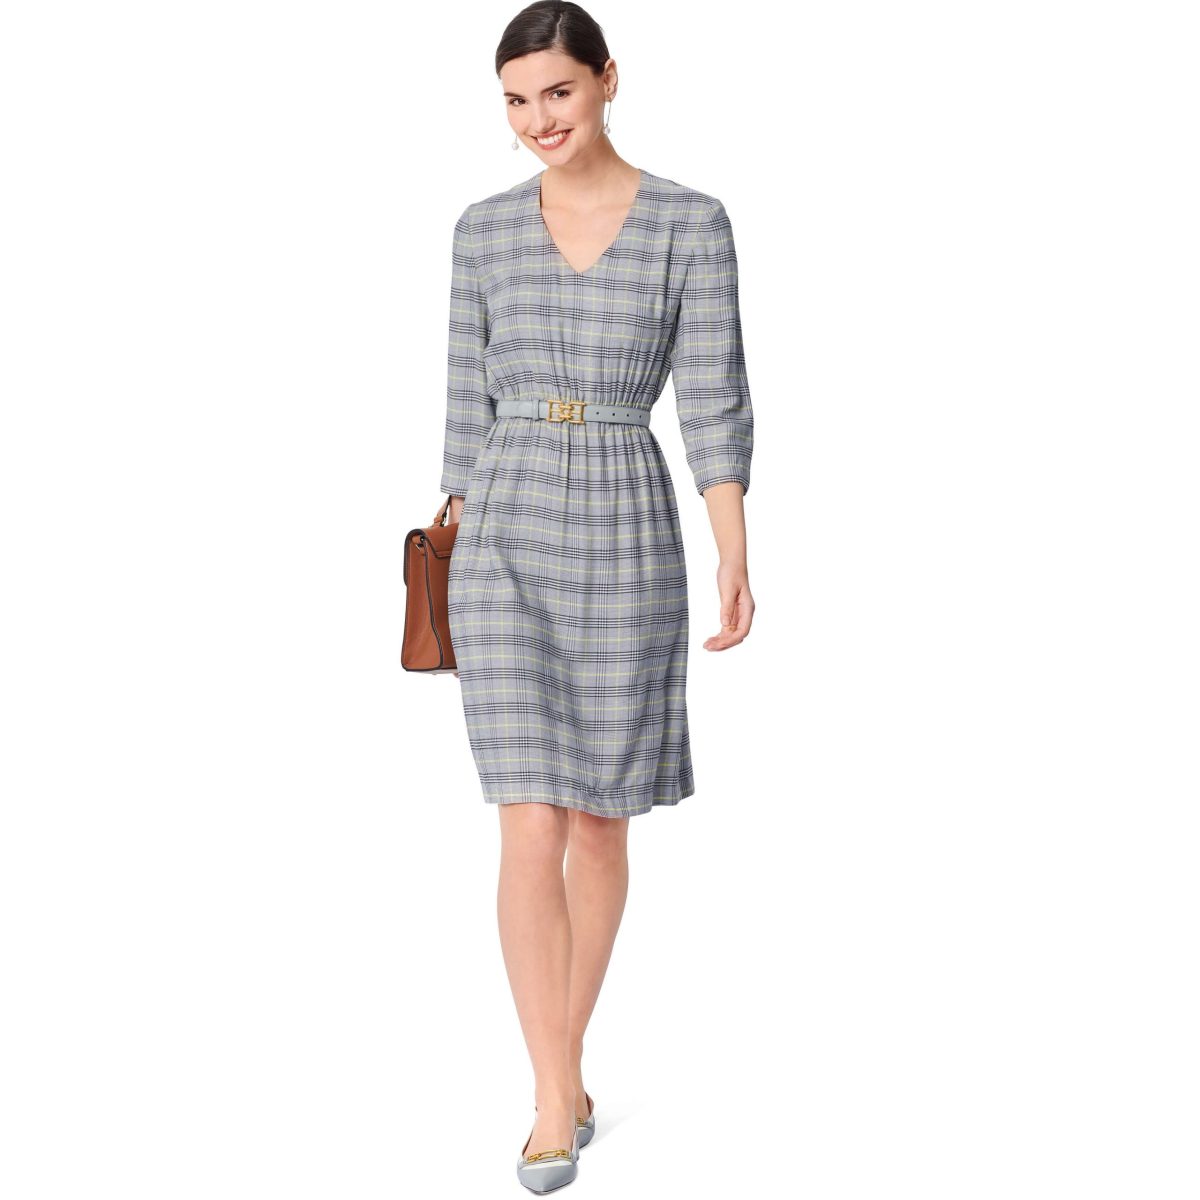 Burda Style Pattern 6030 Misses' Dress and Blouse